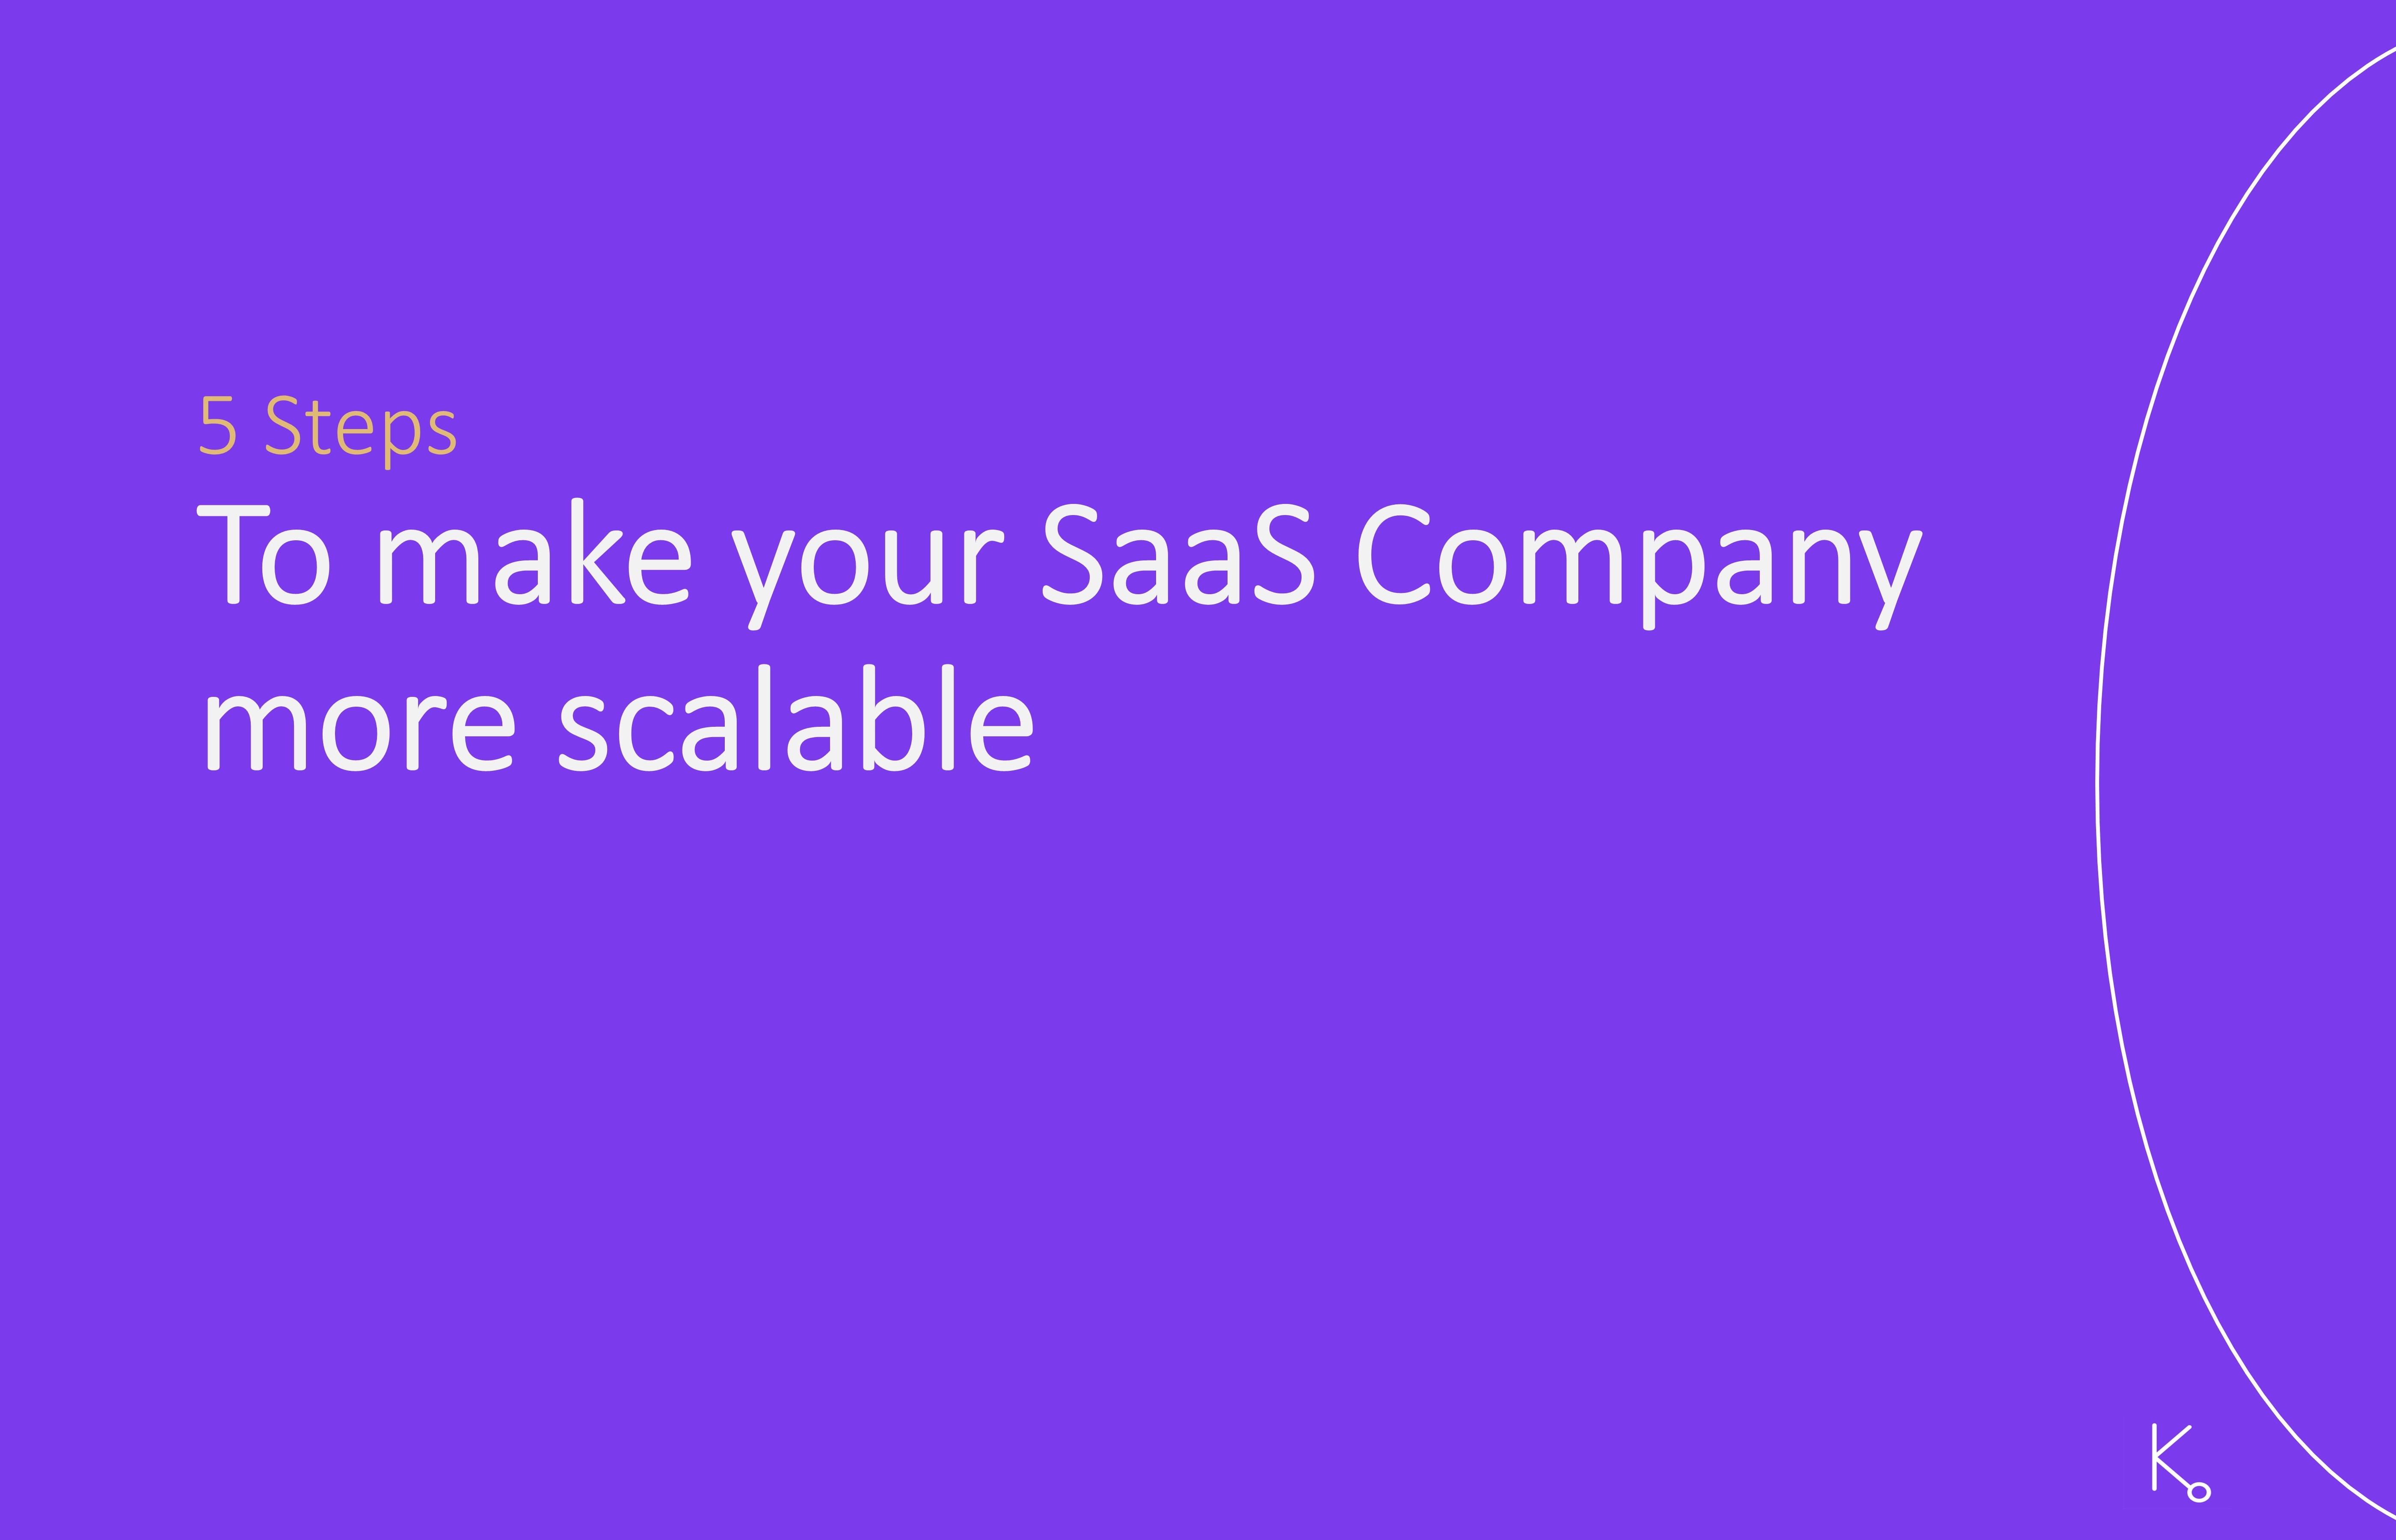 Five Steps to scale your SaaS company